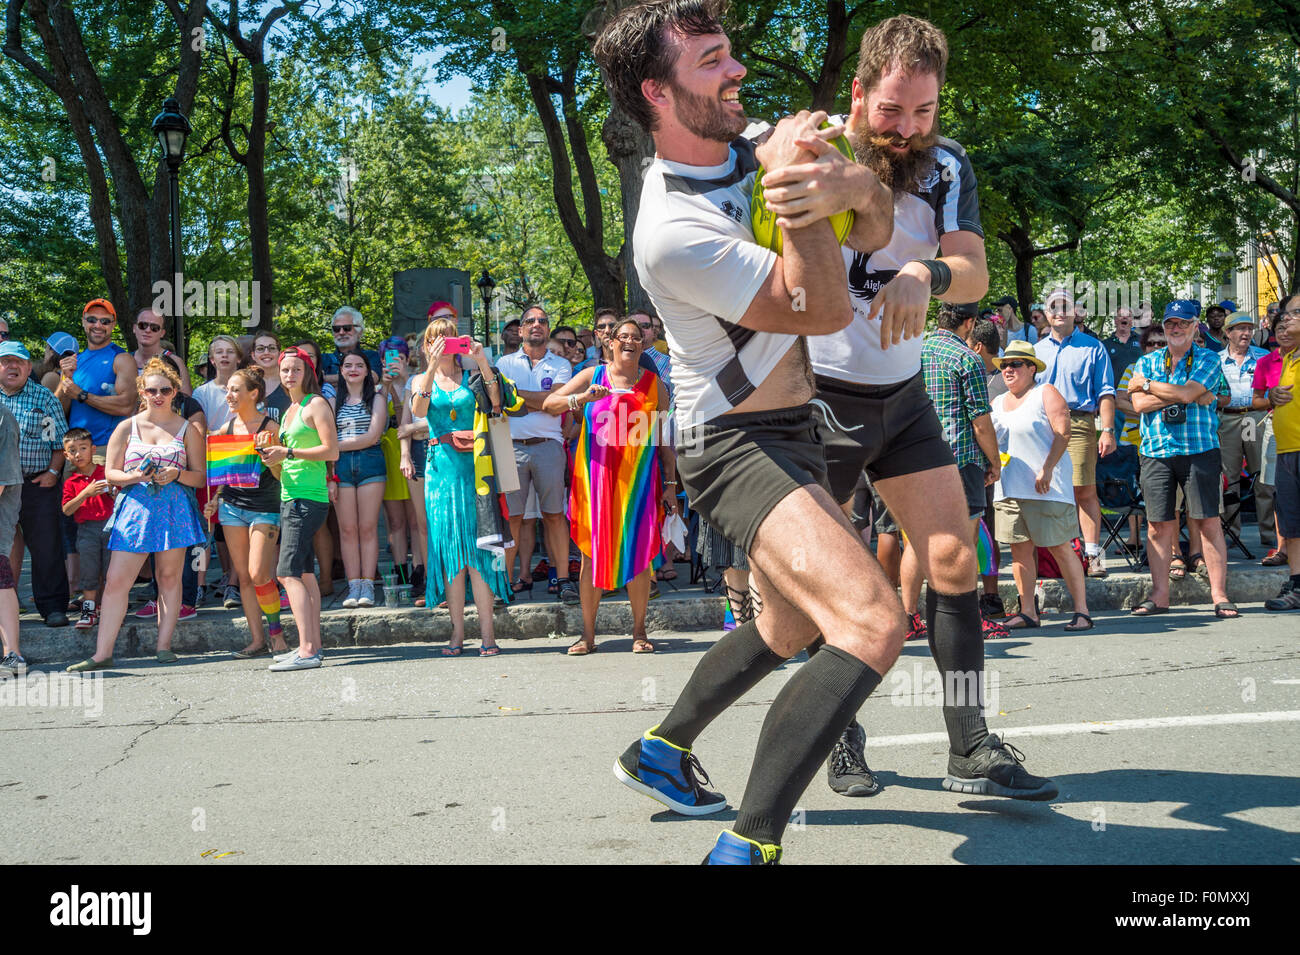 MONTREAL, CANADA, 16th August 2015. Two gay rugby players are fighting for the ball at the 2015 Gay Pride Parade in Montreal. © Marc Bruxelle/Alamy Live News Stock Photo